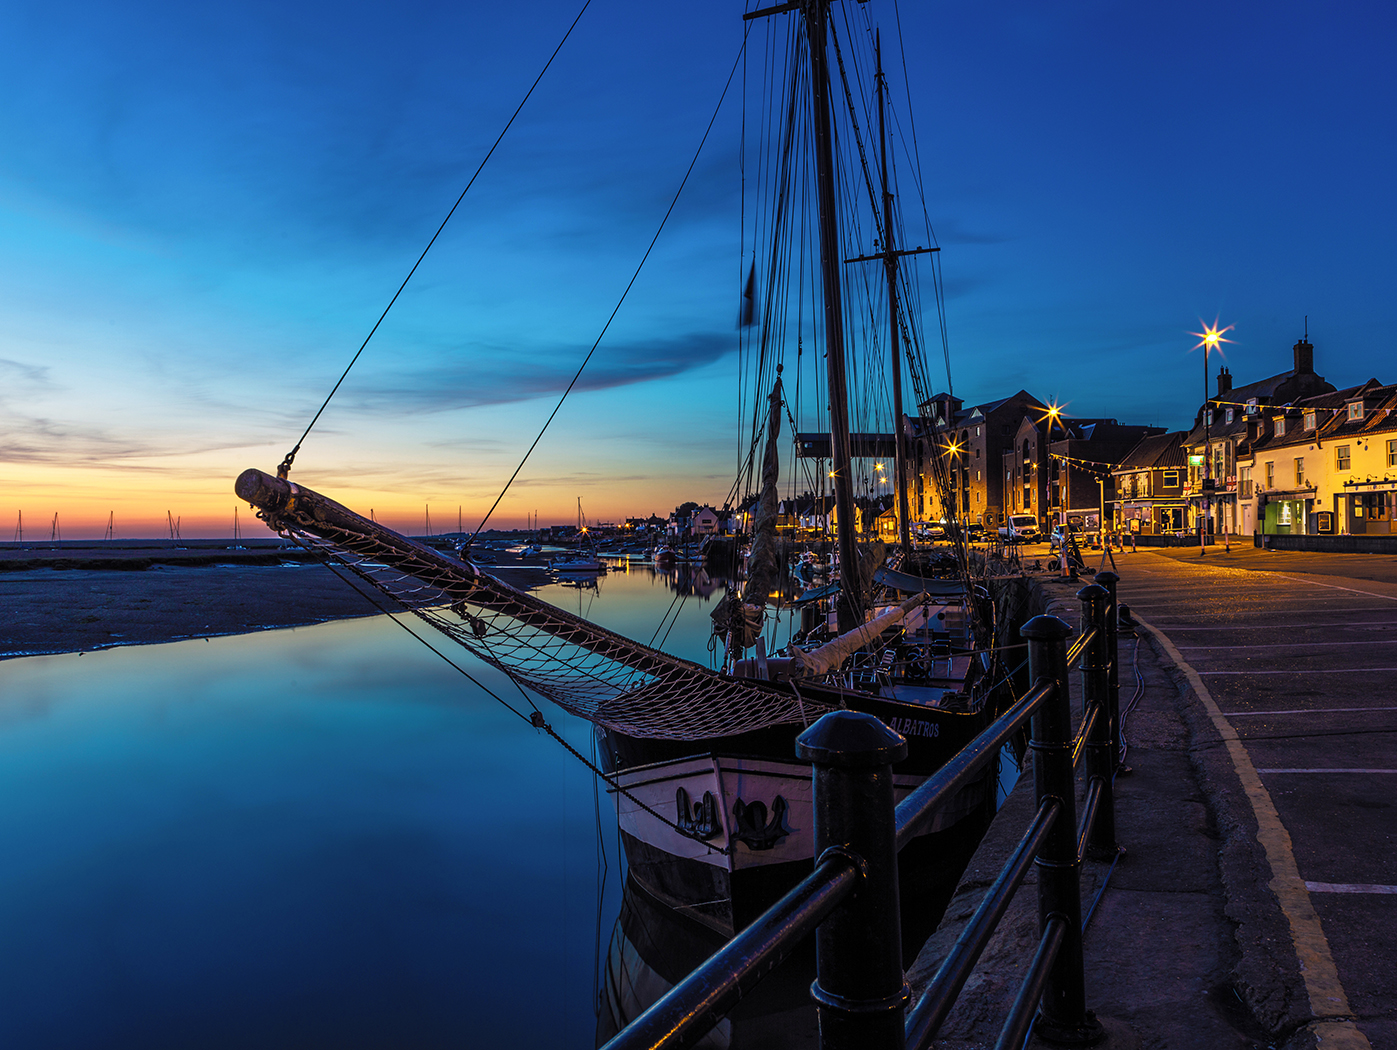 DAWN WELLS HARBOUR by Malcolm Nabarro